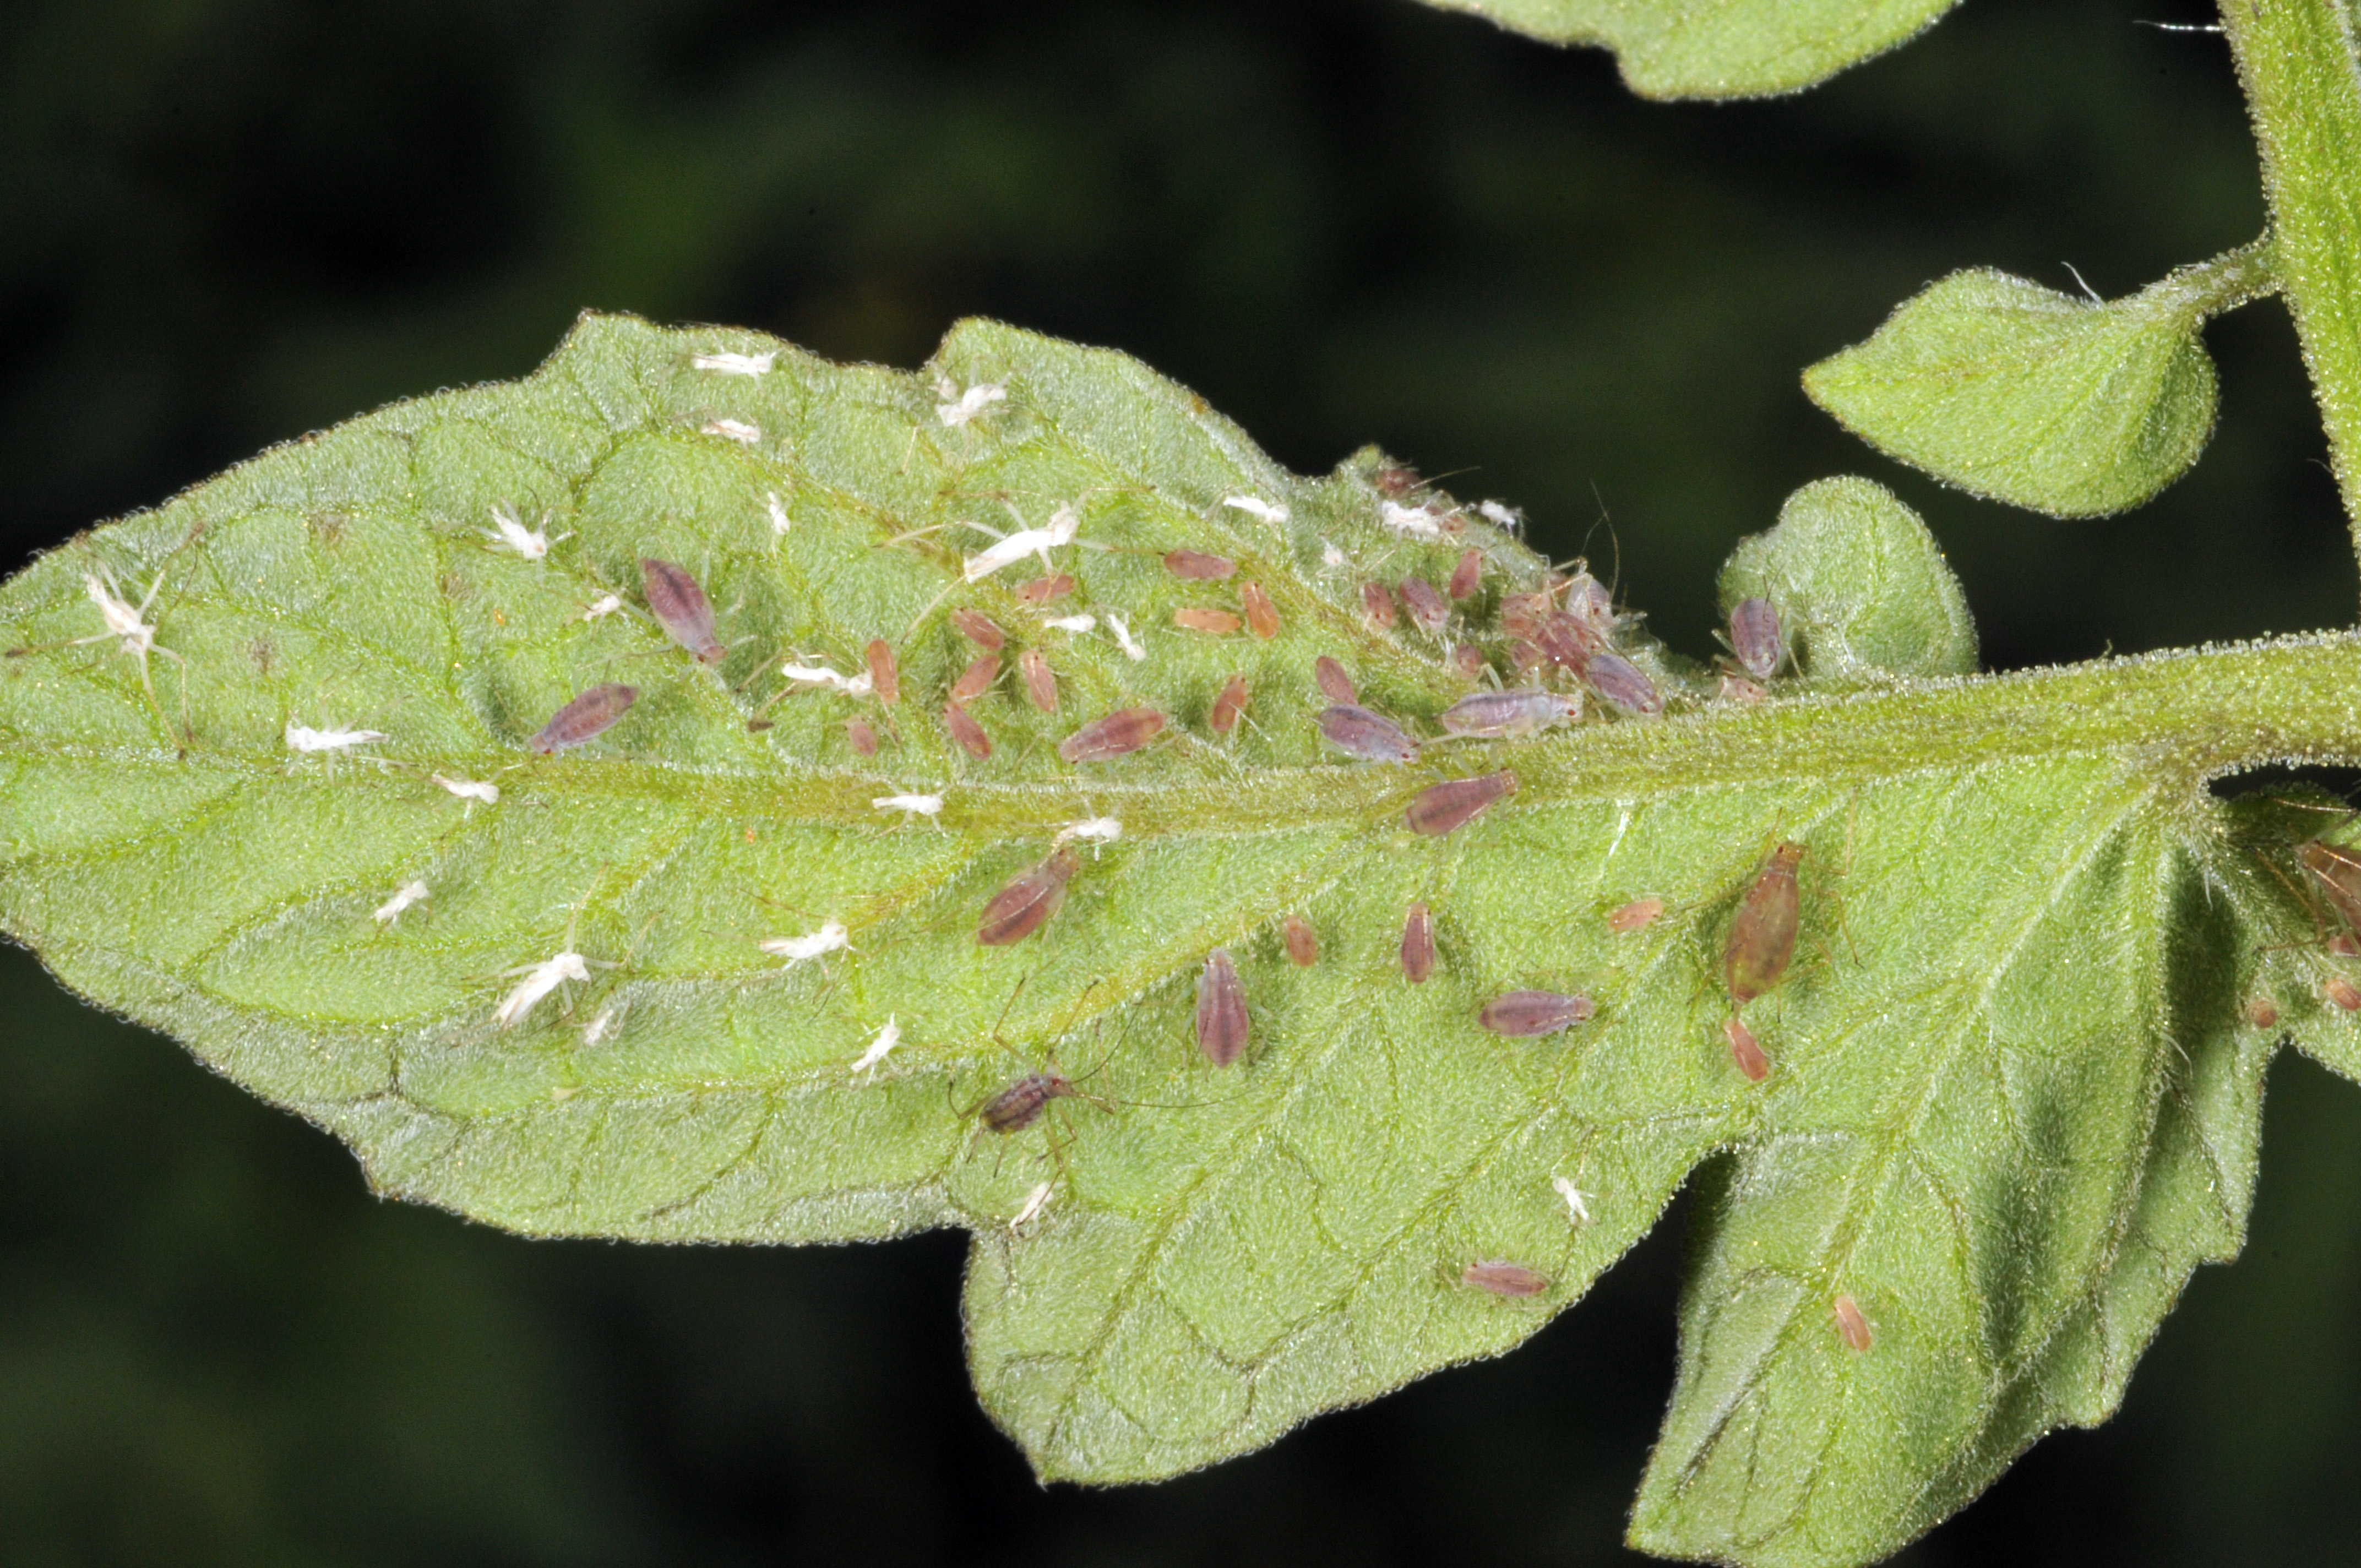 Aphids and cast skins